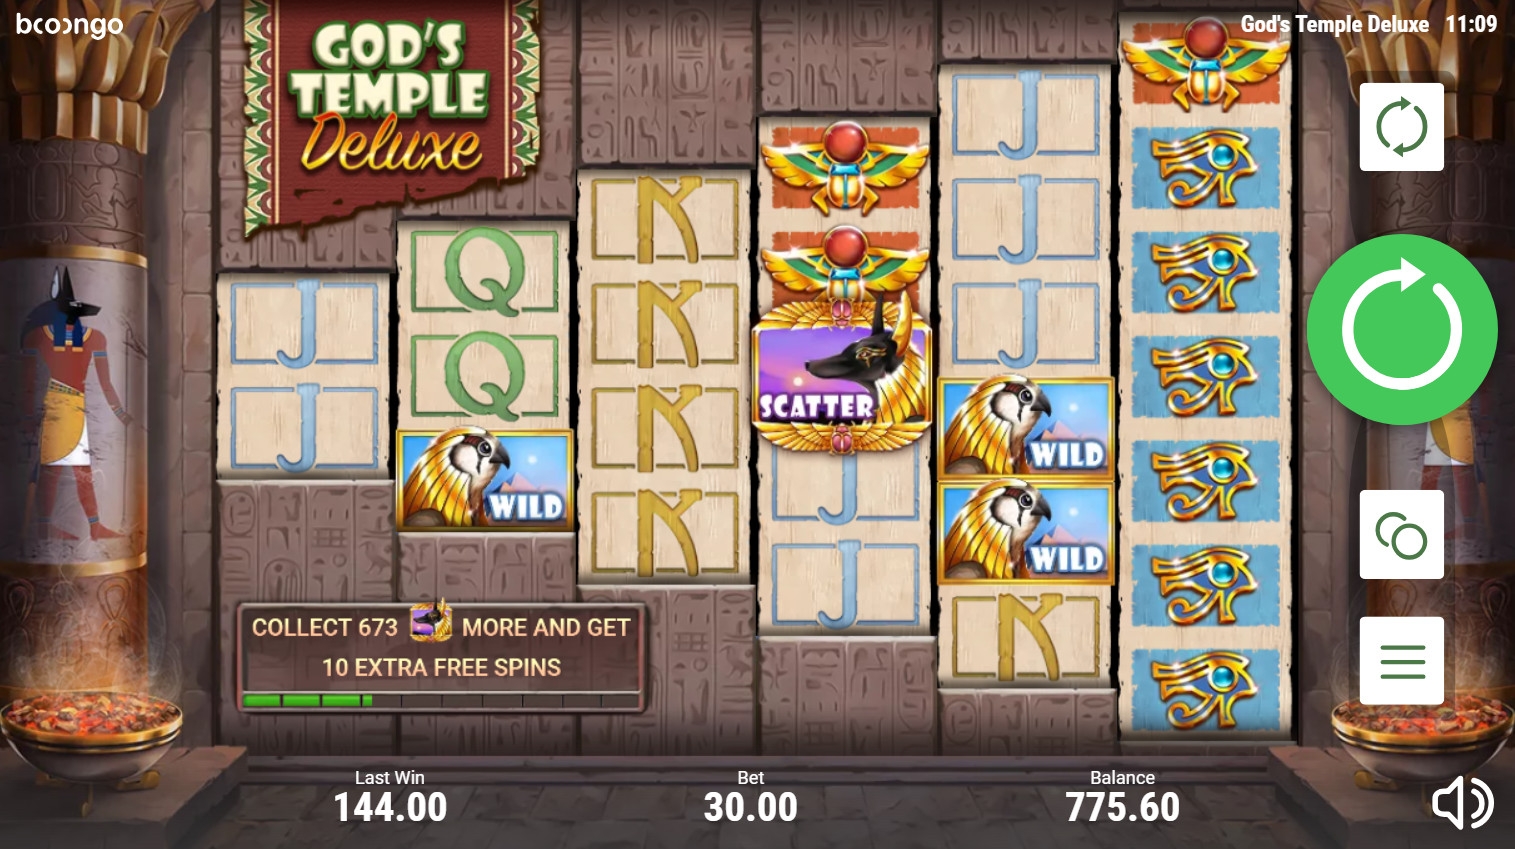 God’s Temple Deluxe (God’s Temple Deluxe) from category Slots